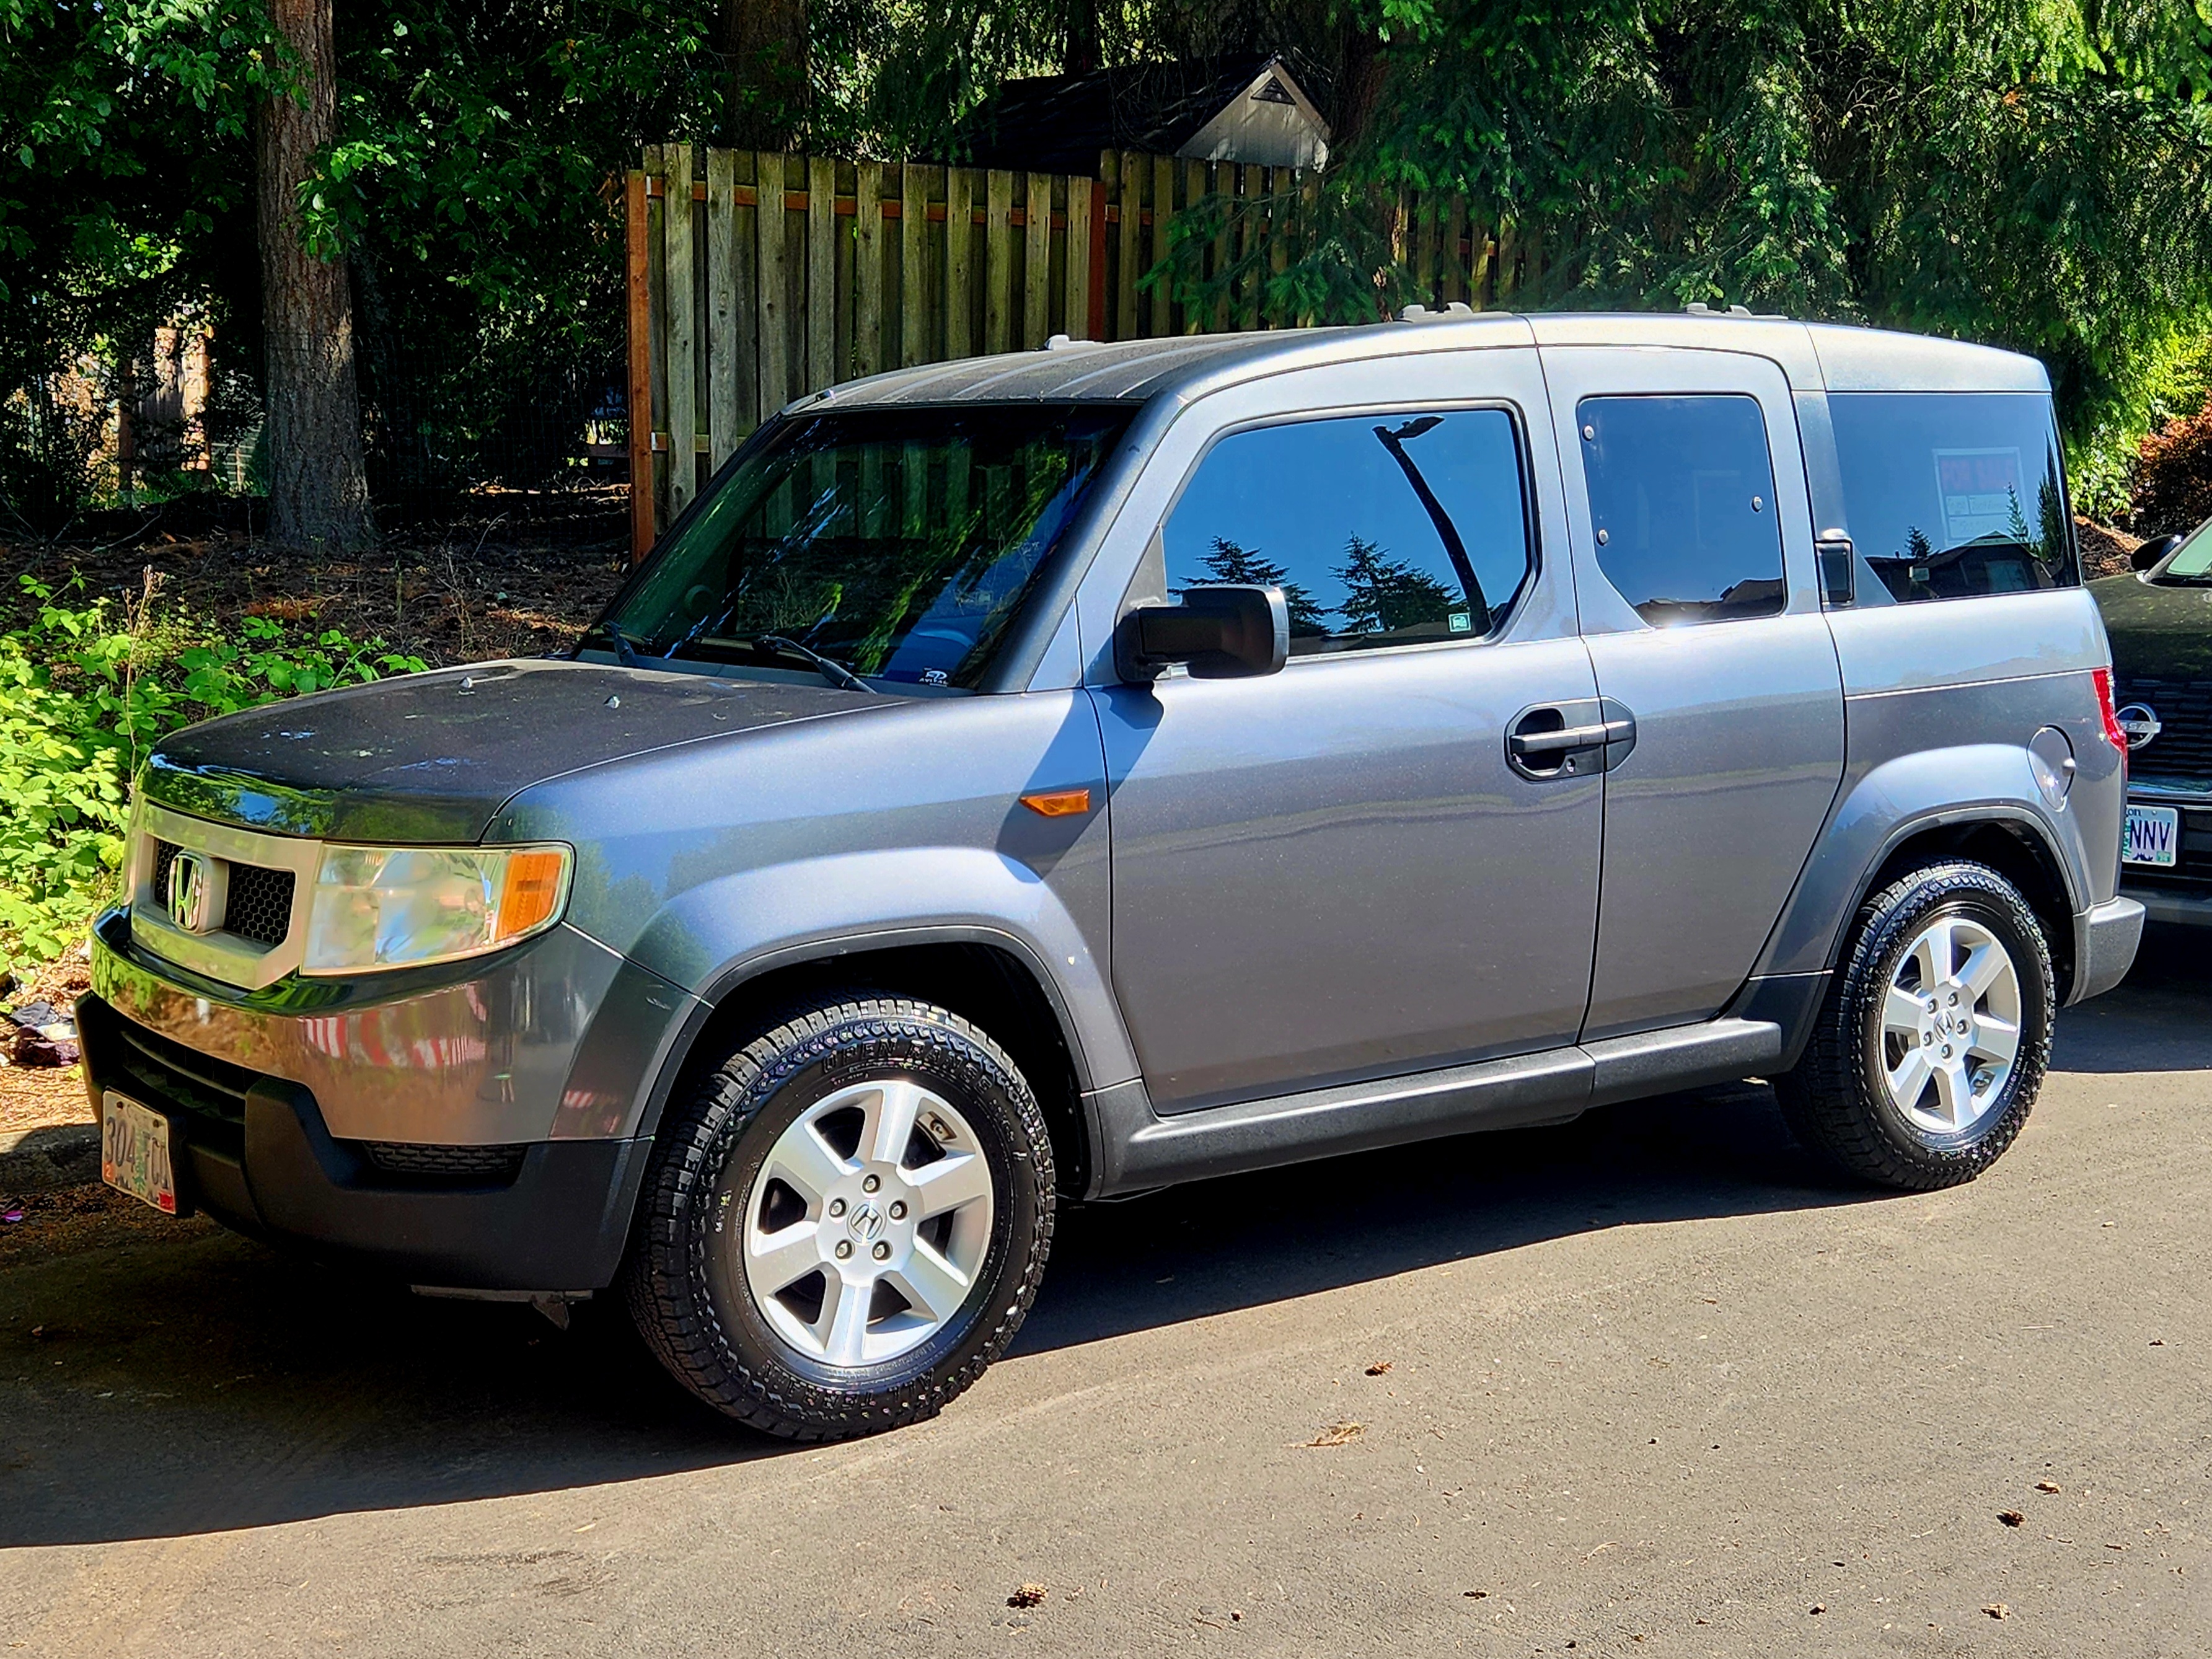 Used Honda Element for Sale Near Me